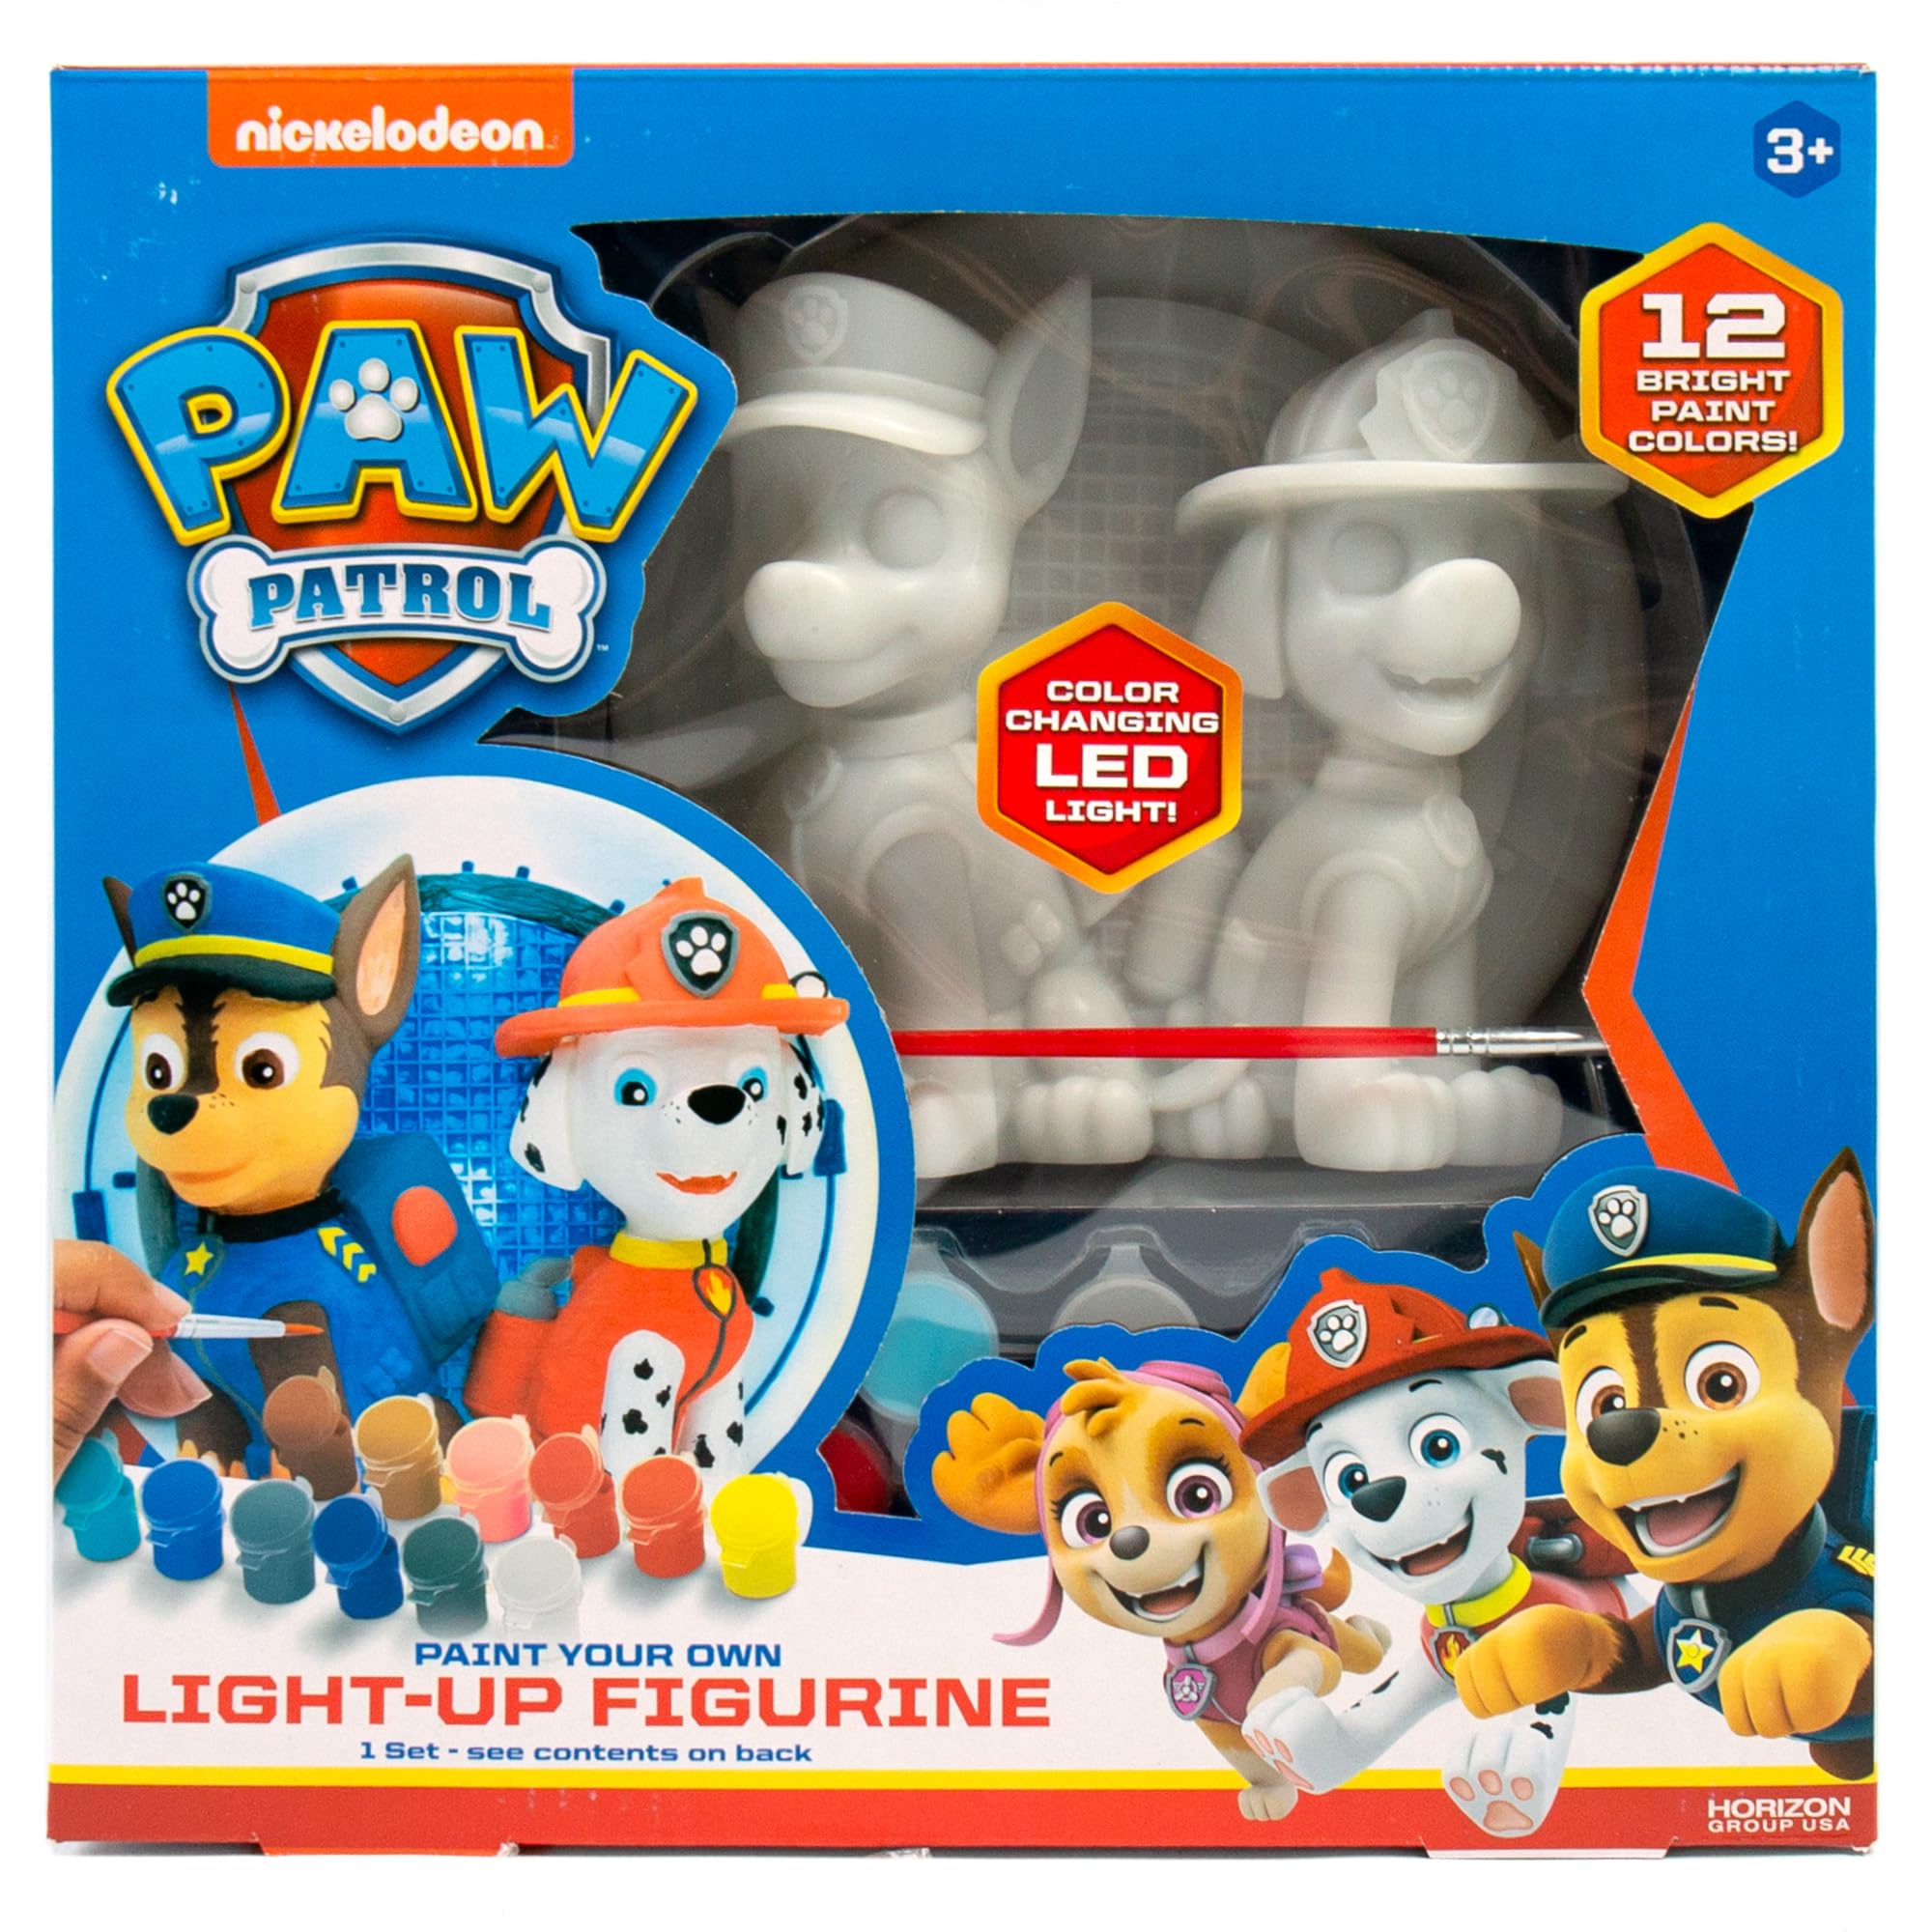 Paw Patrol Paint Your Own Light-Up Figurine, Paintable Paw Patrol Night Light, Paw Patrol Chase Multicolor Light, Paw Patrol Party Decorations, Paw Patrol Toys & Gifts for Kids Ages 3+